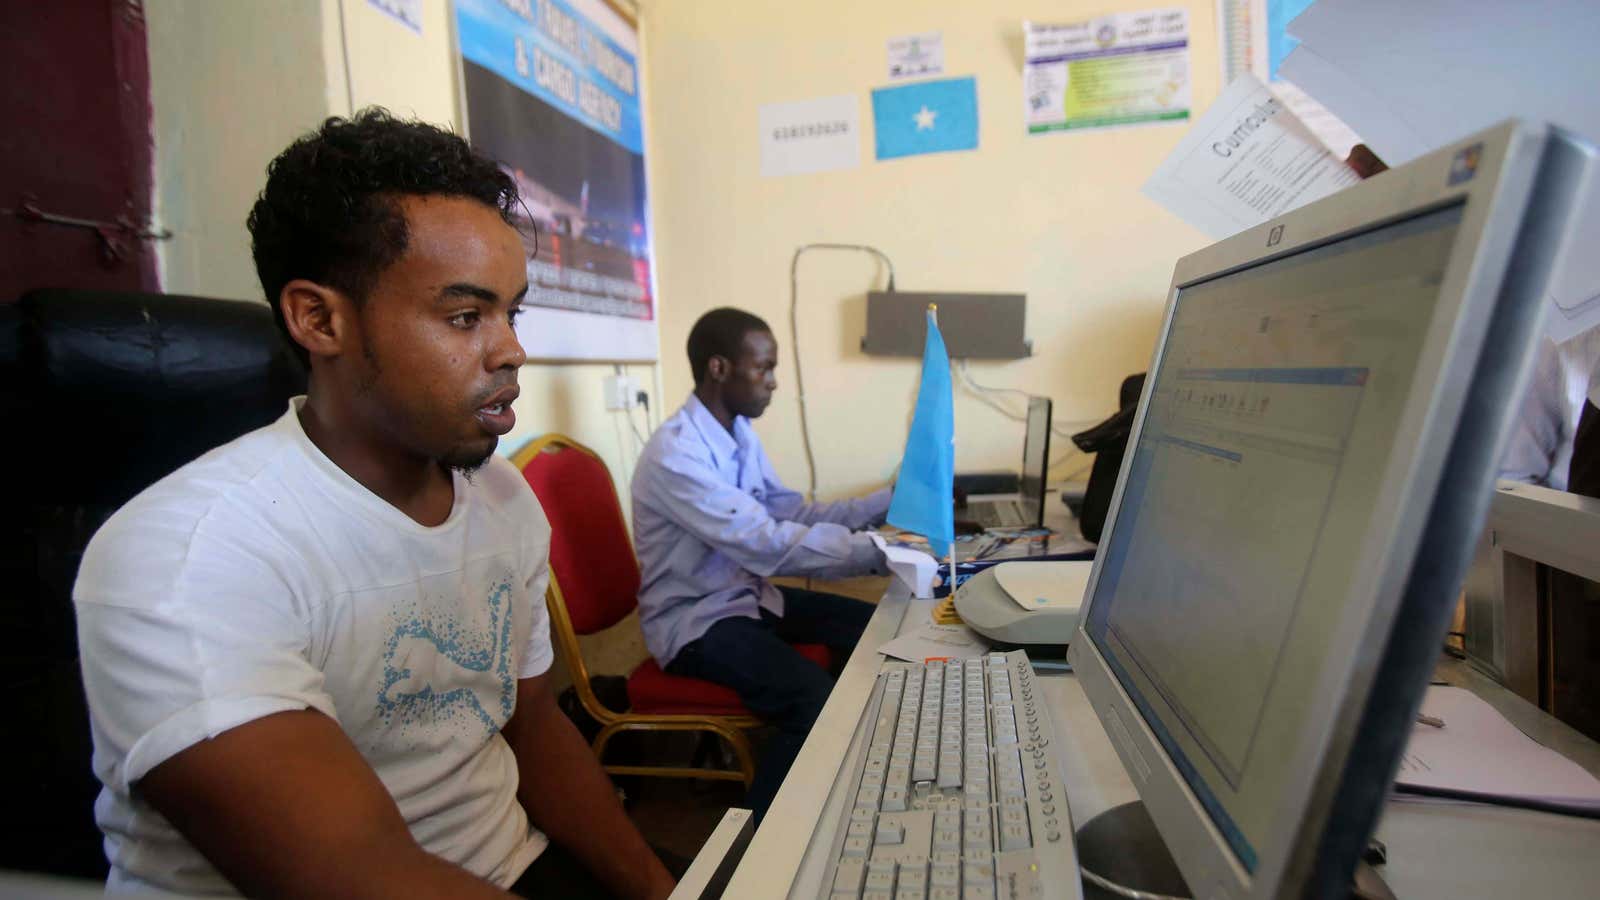 Somalia was one of the last African countries to go online.